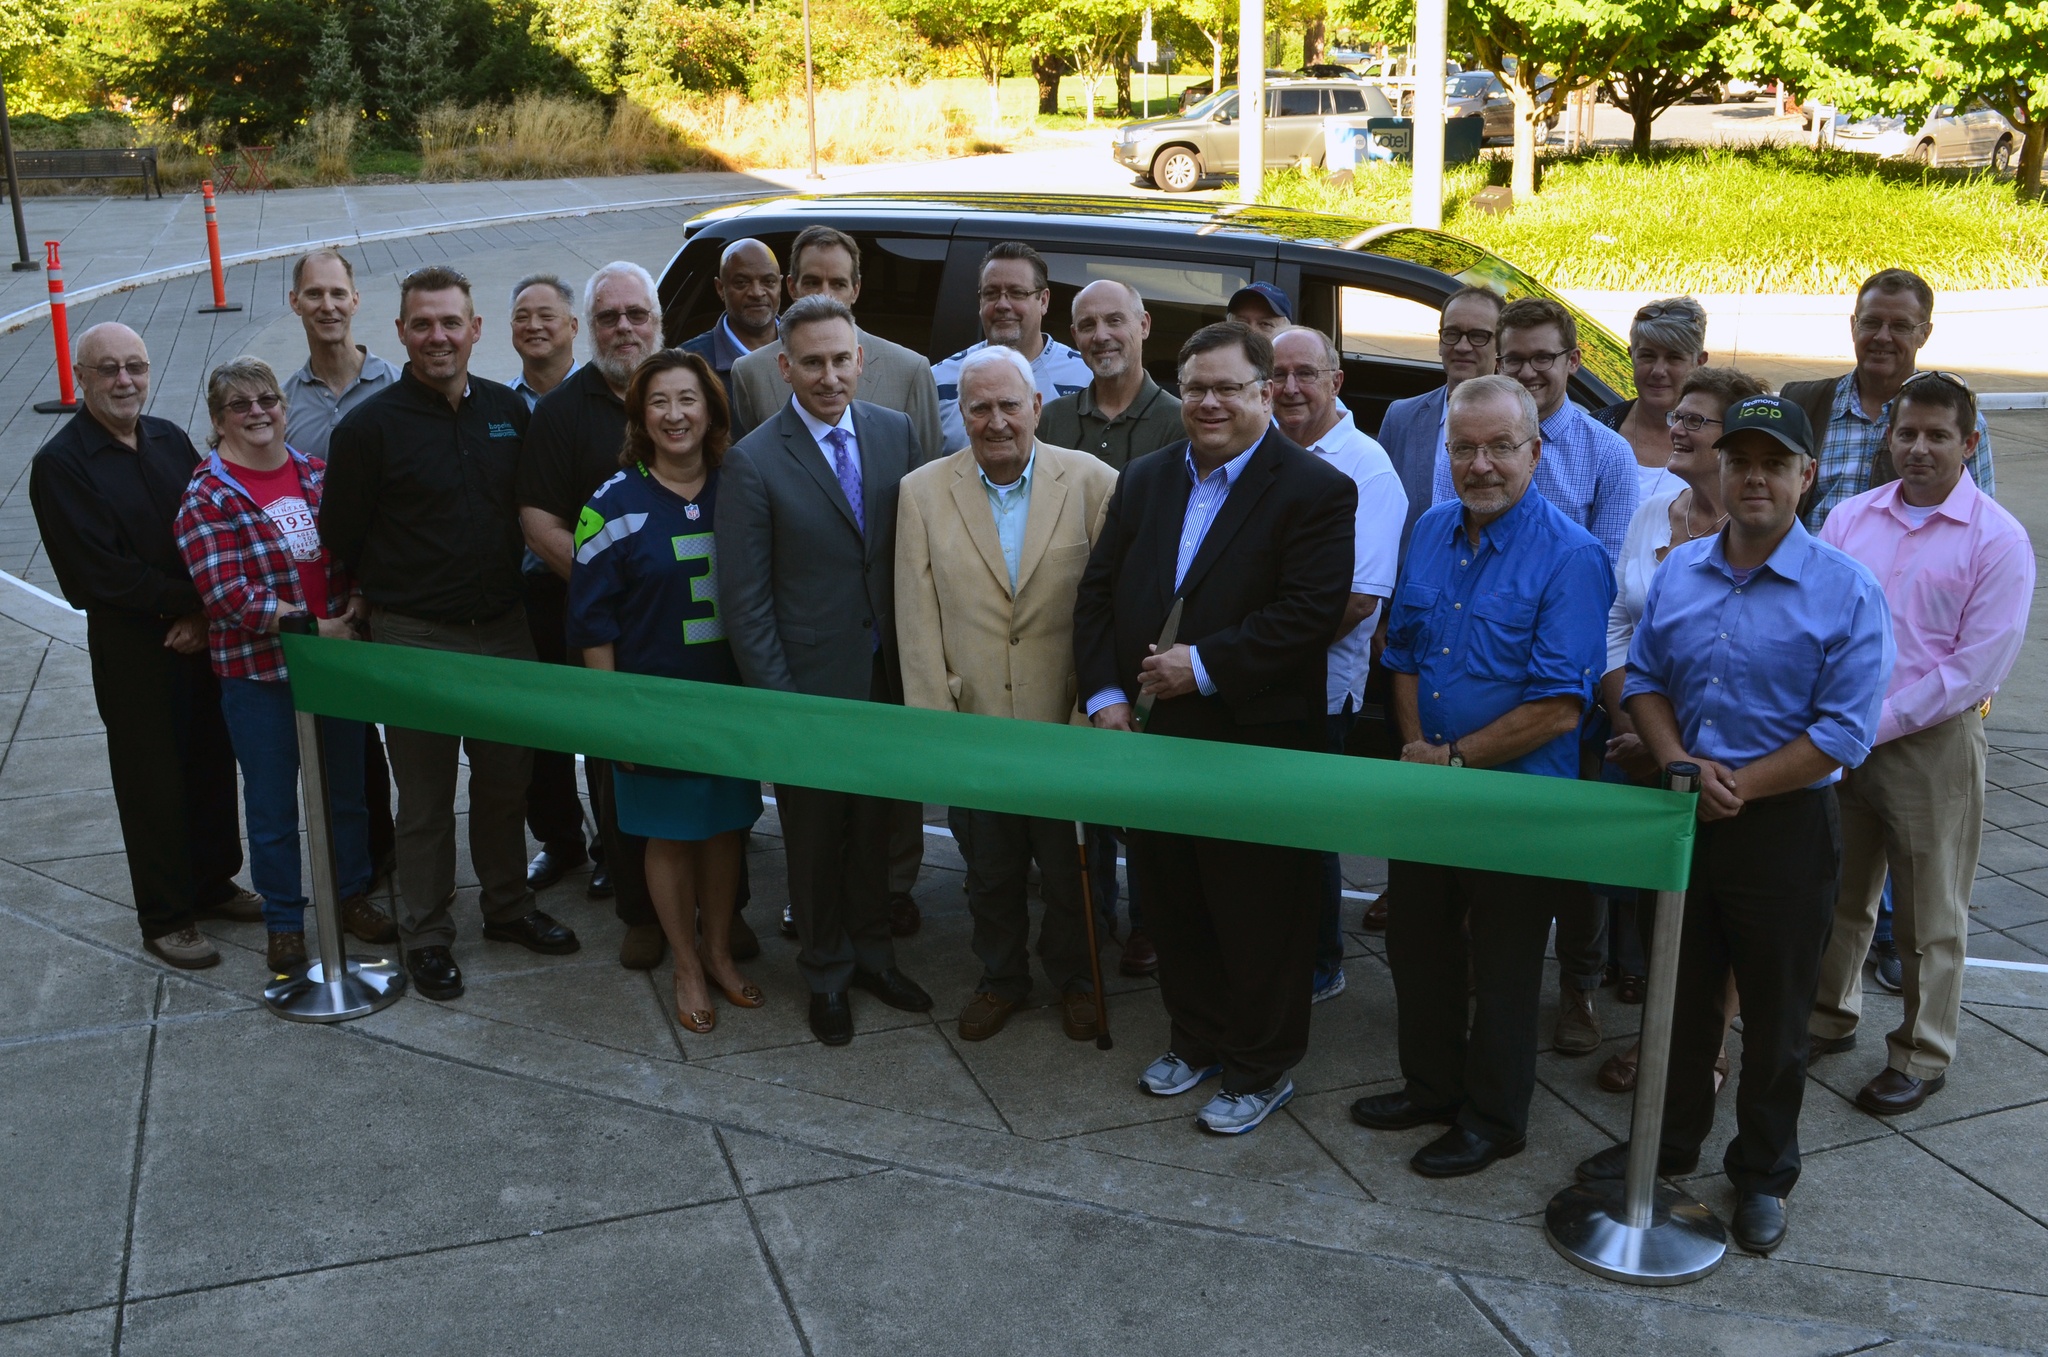 Staff and elected officials from the City of Redmond and King County celebrated the grand opening of the new Redmond LOOP shuttle service.